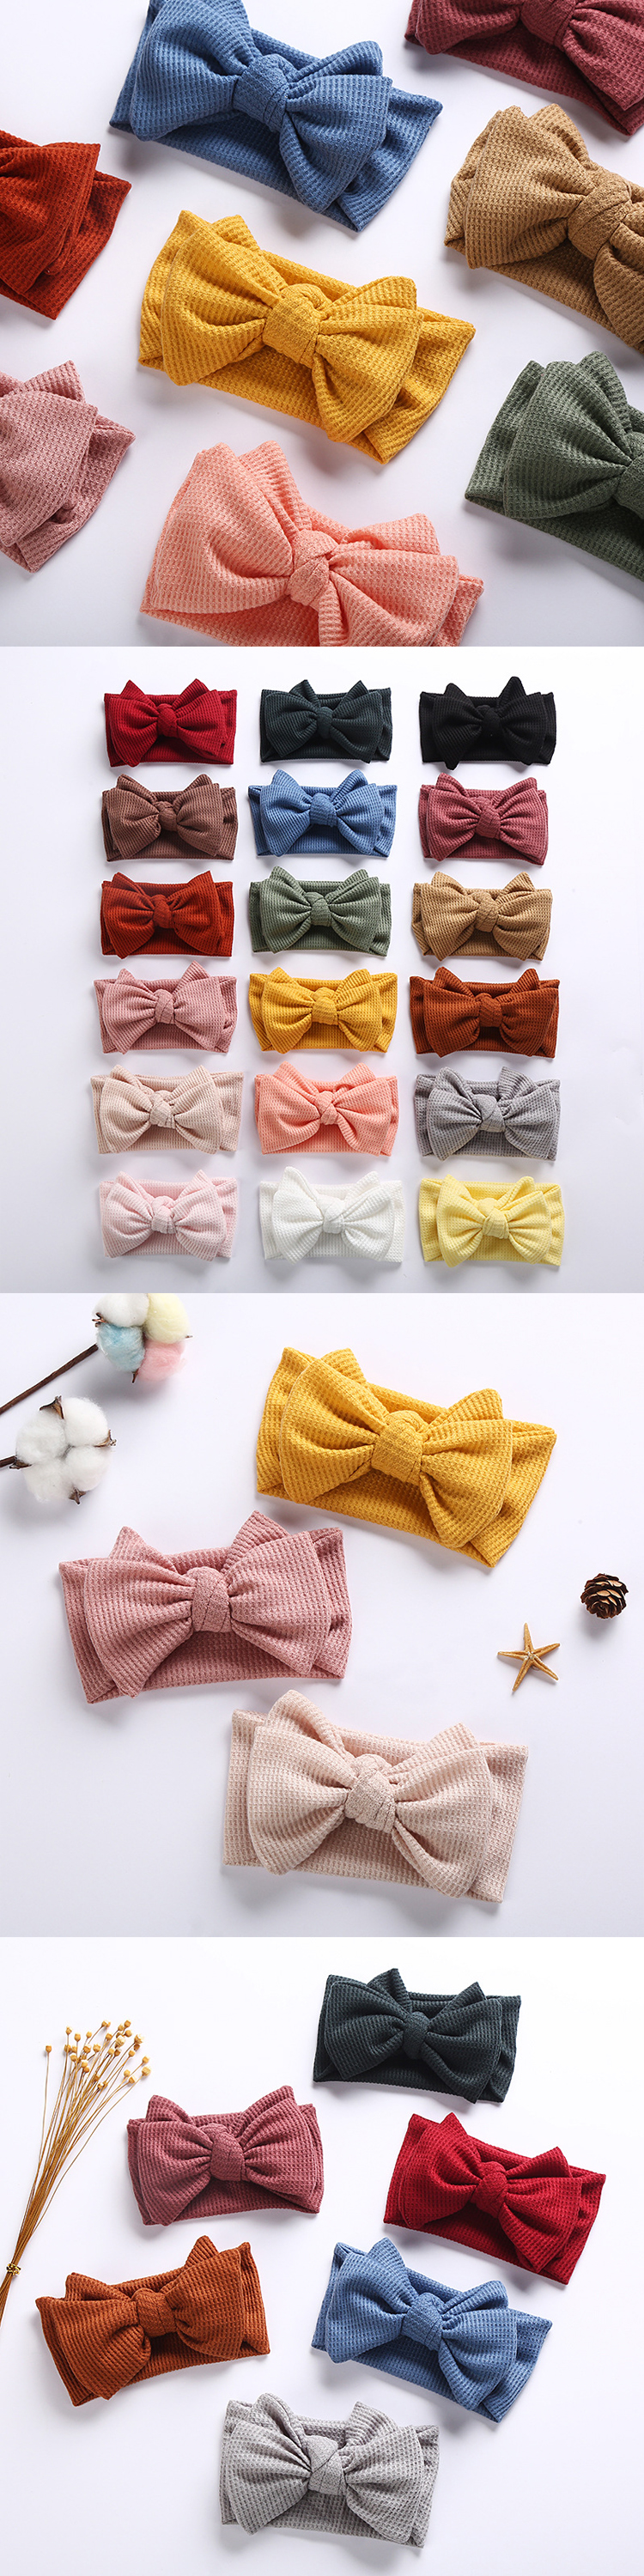 【3 packs】Baby Butterfly Hair Band